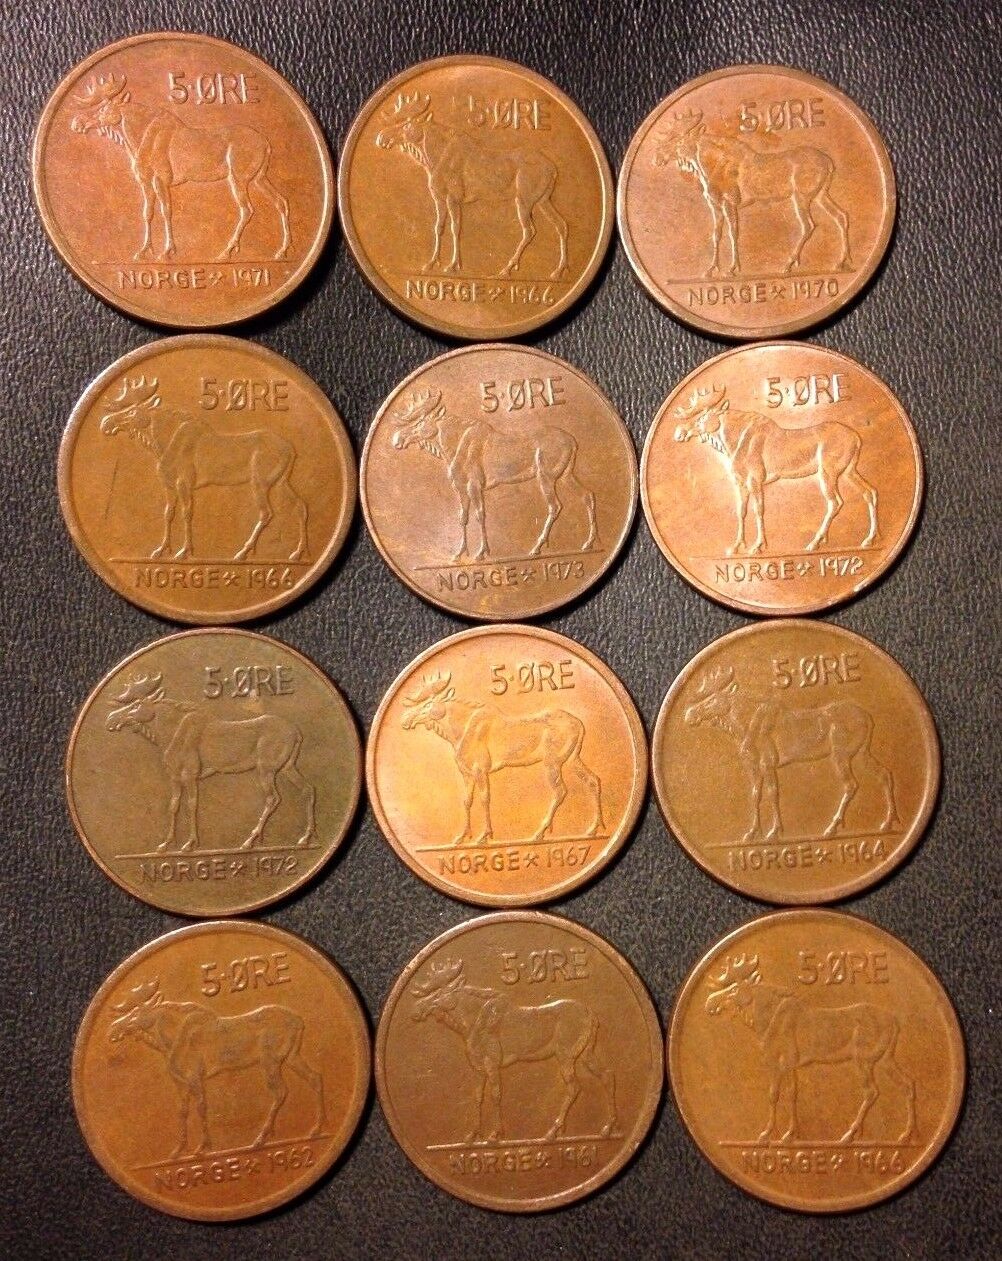 Vintage Norway Coin Lot - 5 Ore - Moose Series - 12 Great Coins - Free Shipping